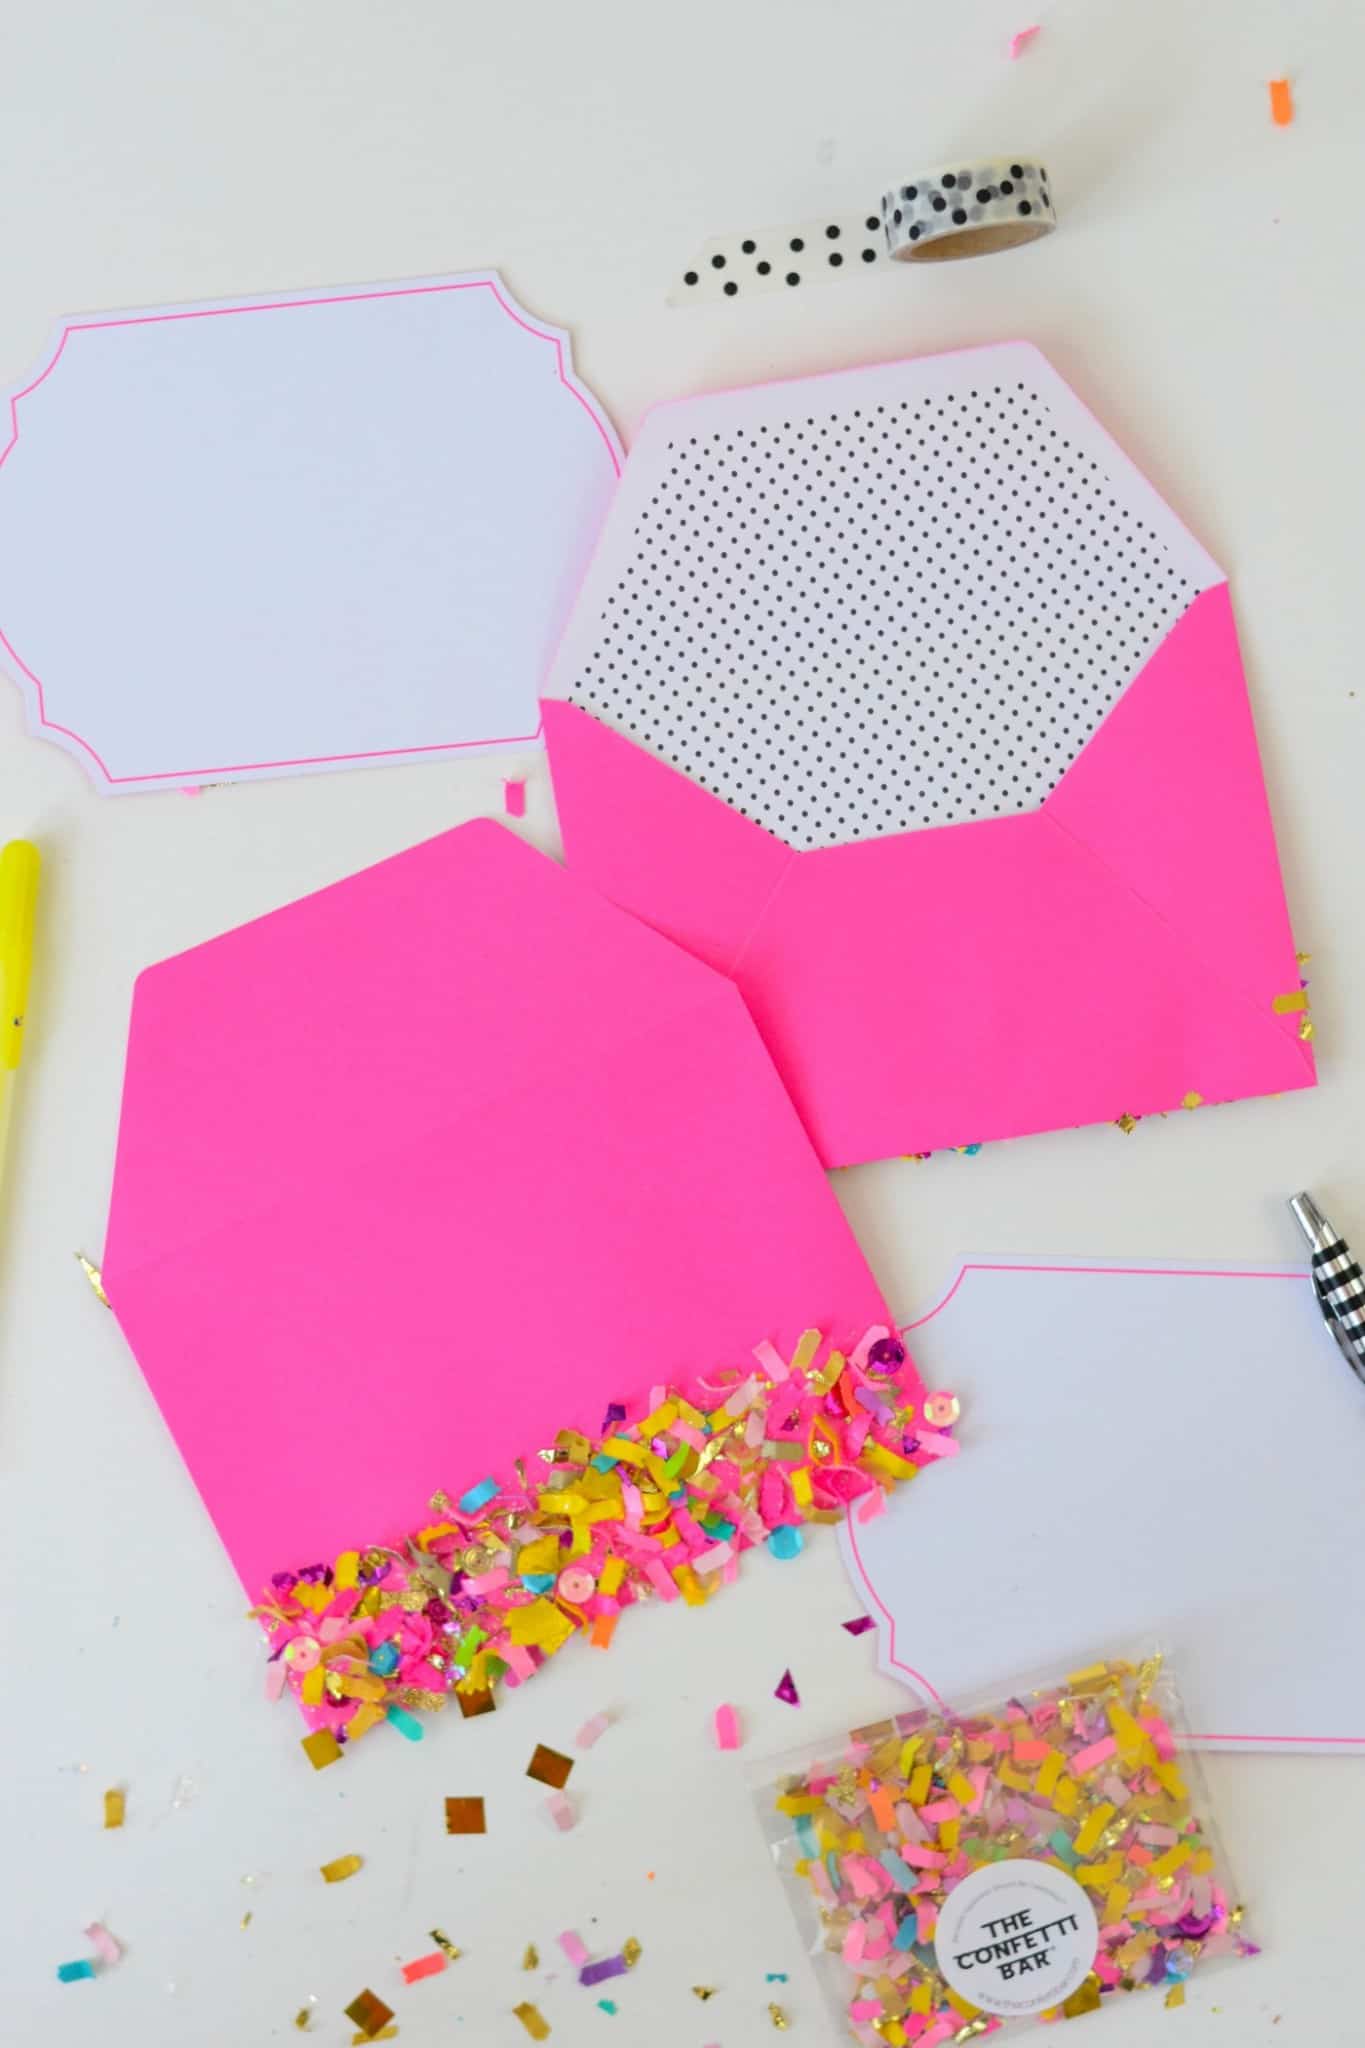 How to decorate envelopes with confetti